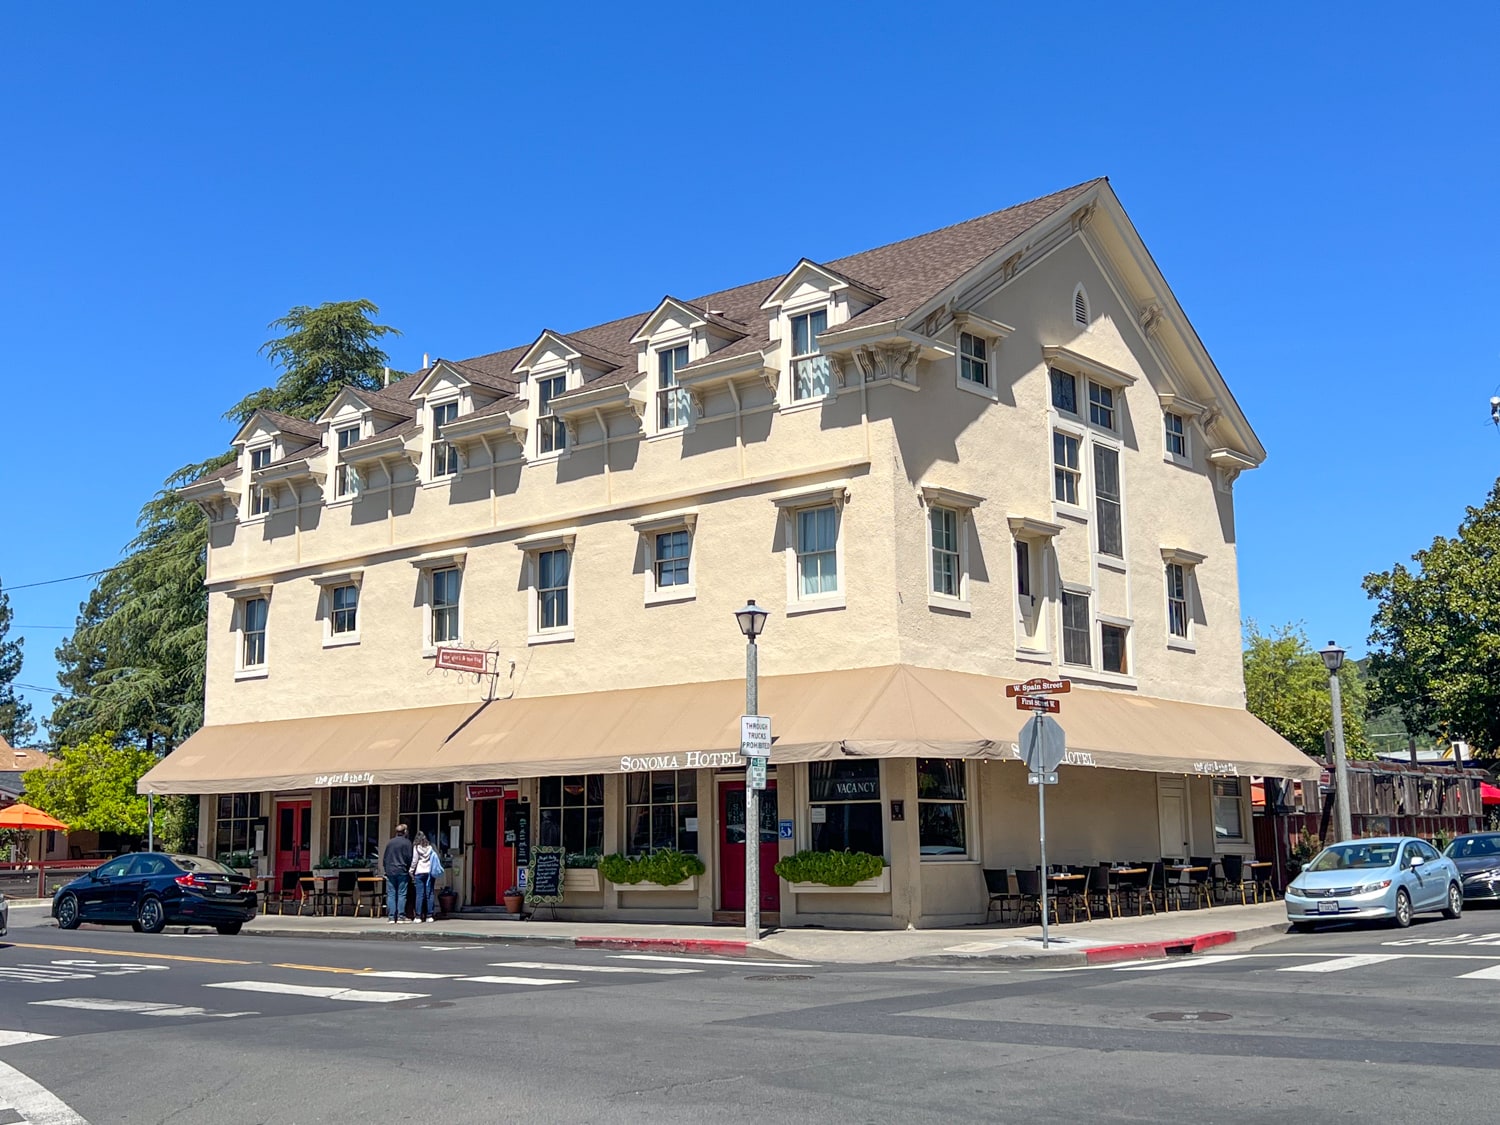 the girl and the fig restaurant is in the Sonoma Hotel